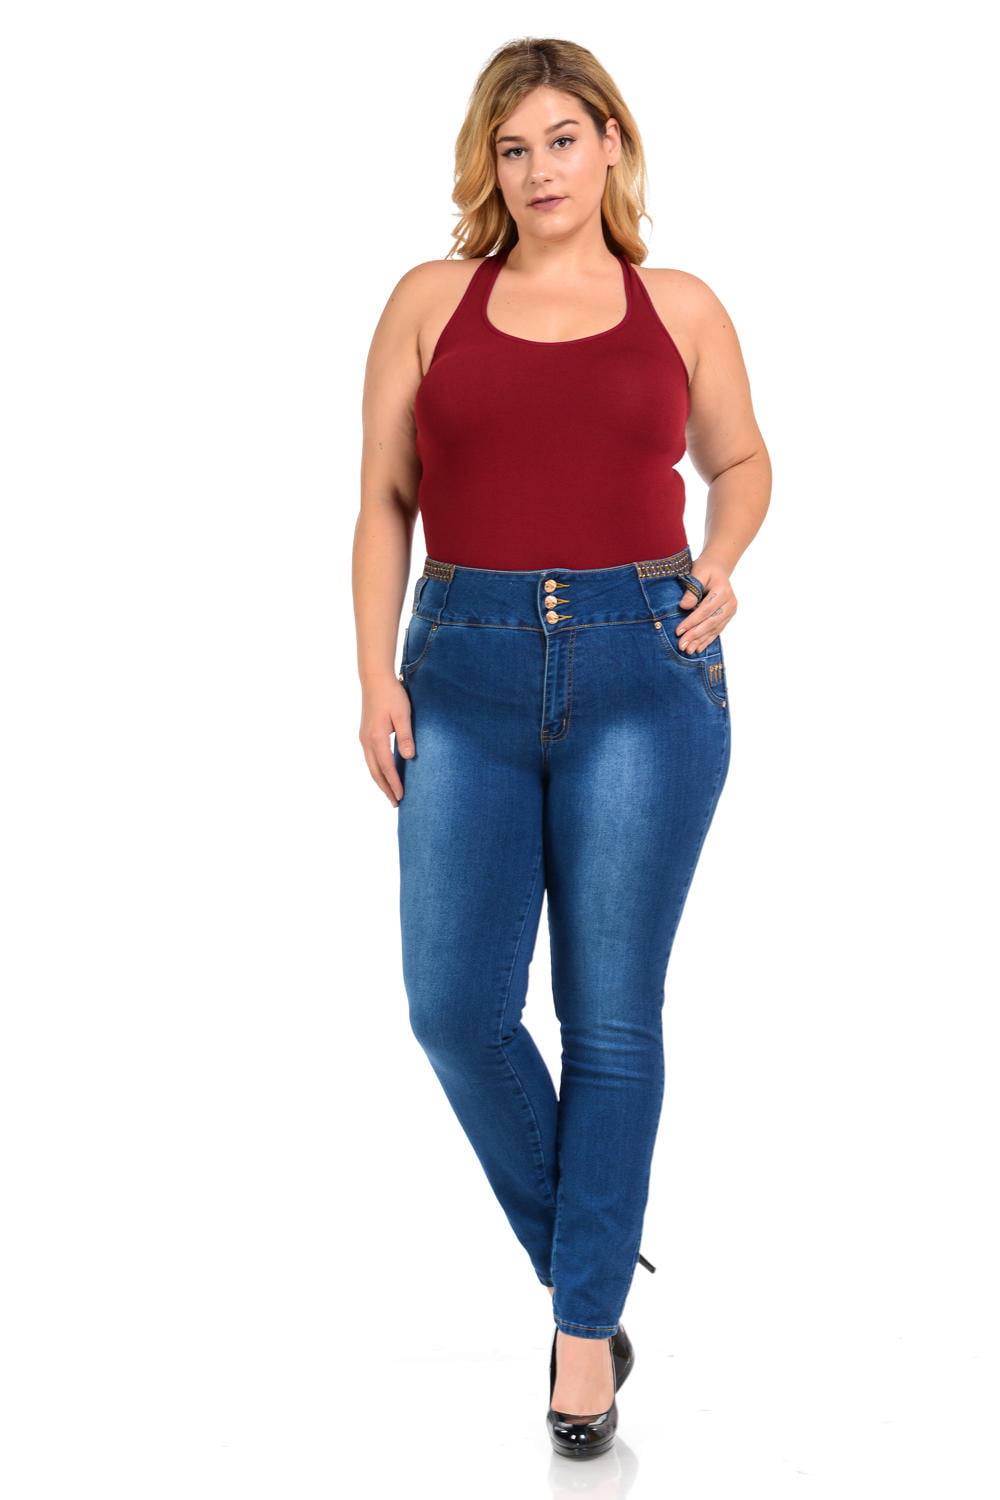 high waisted jeans on plus size